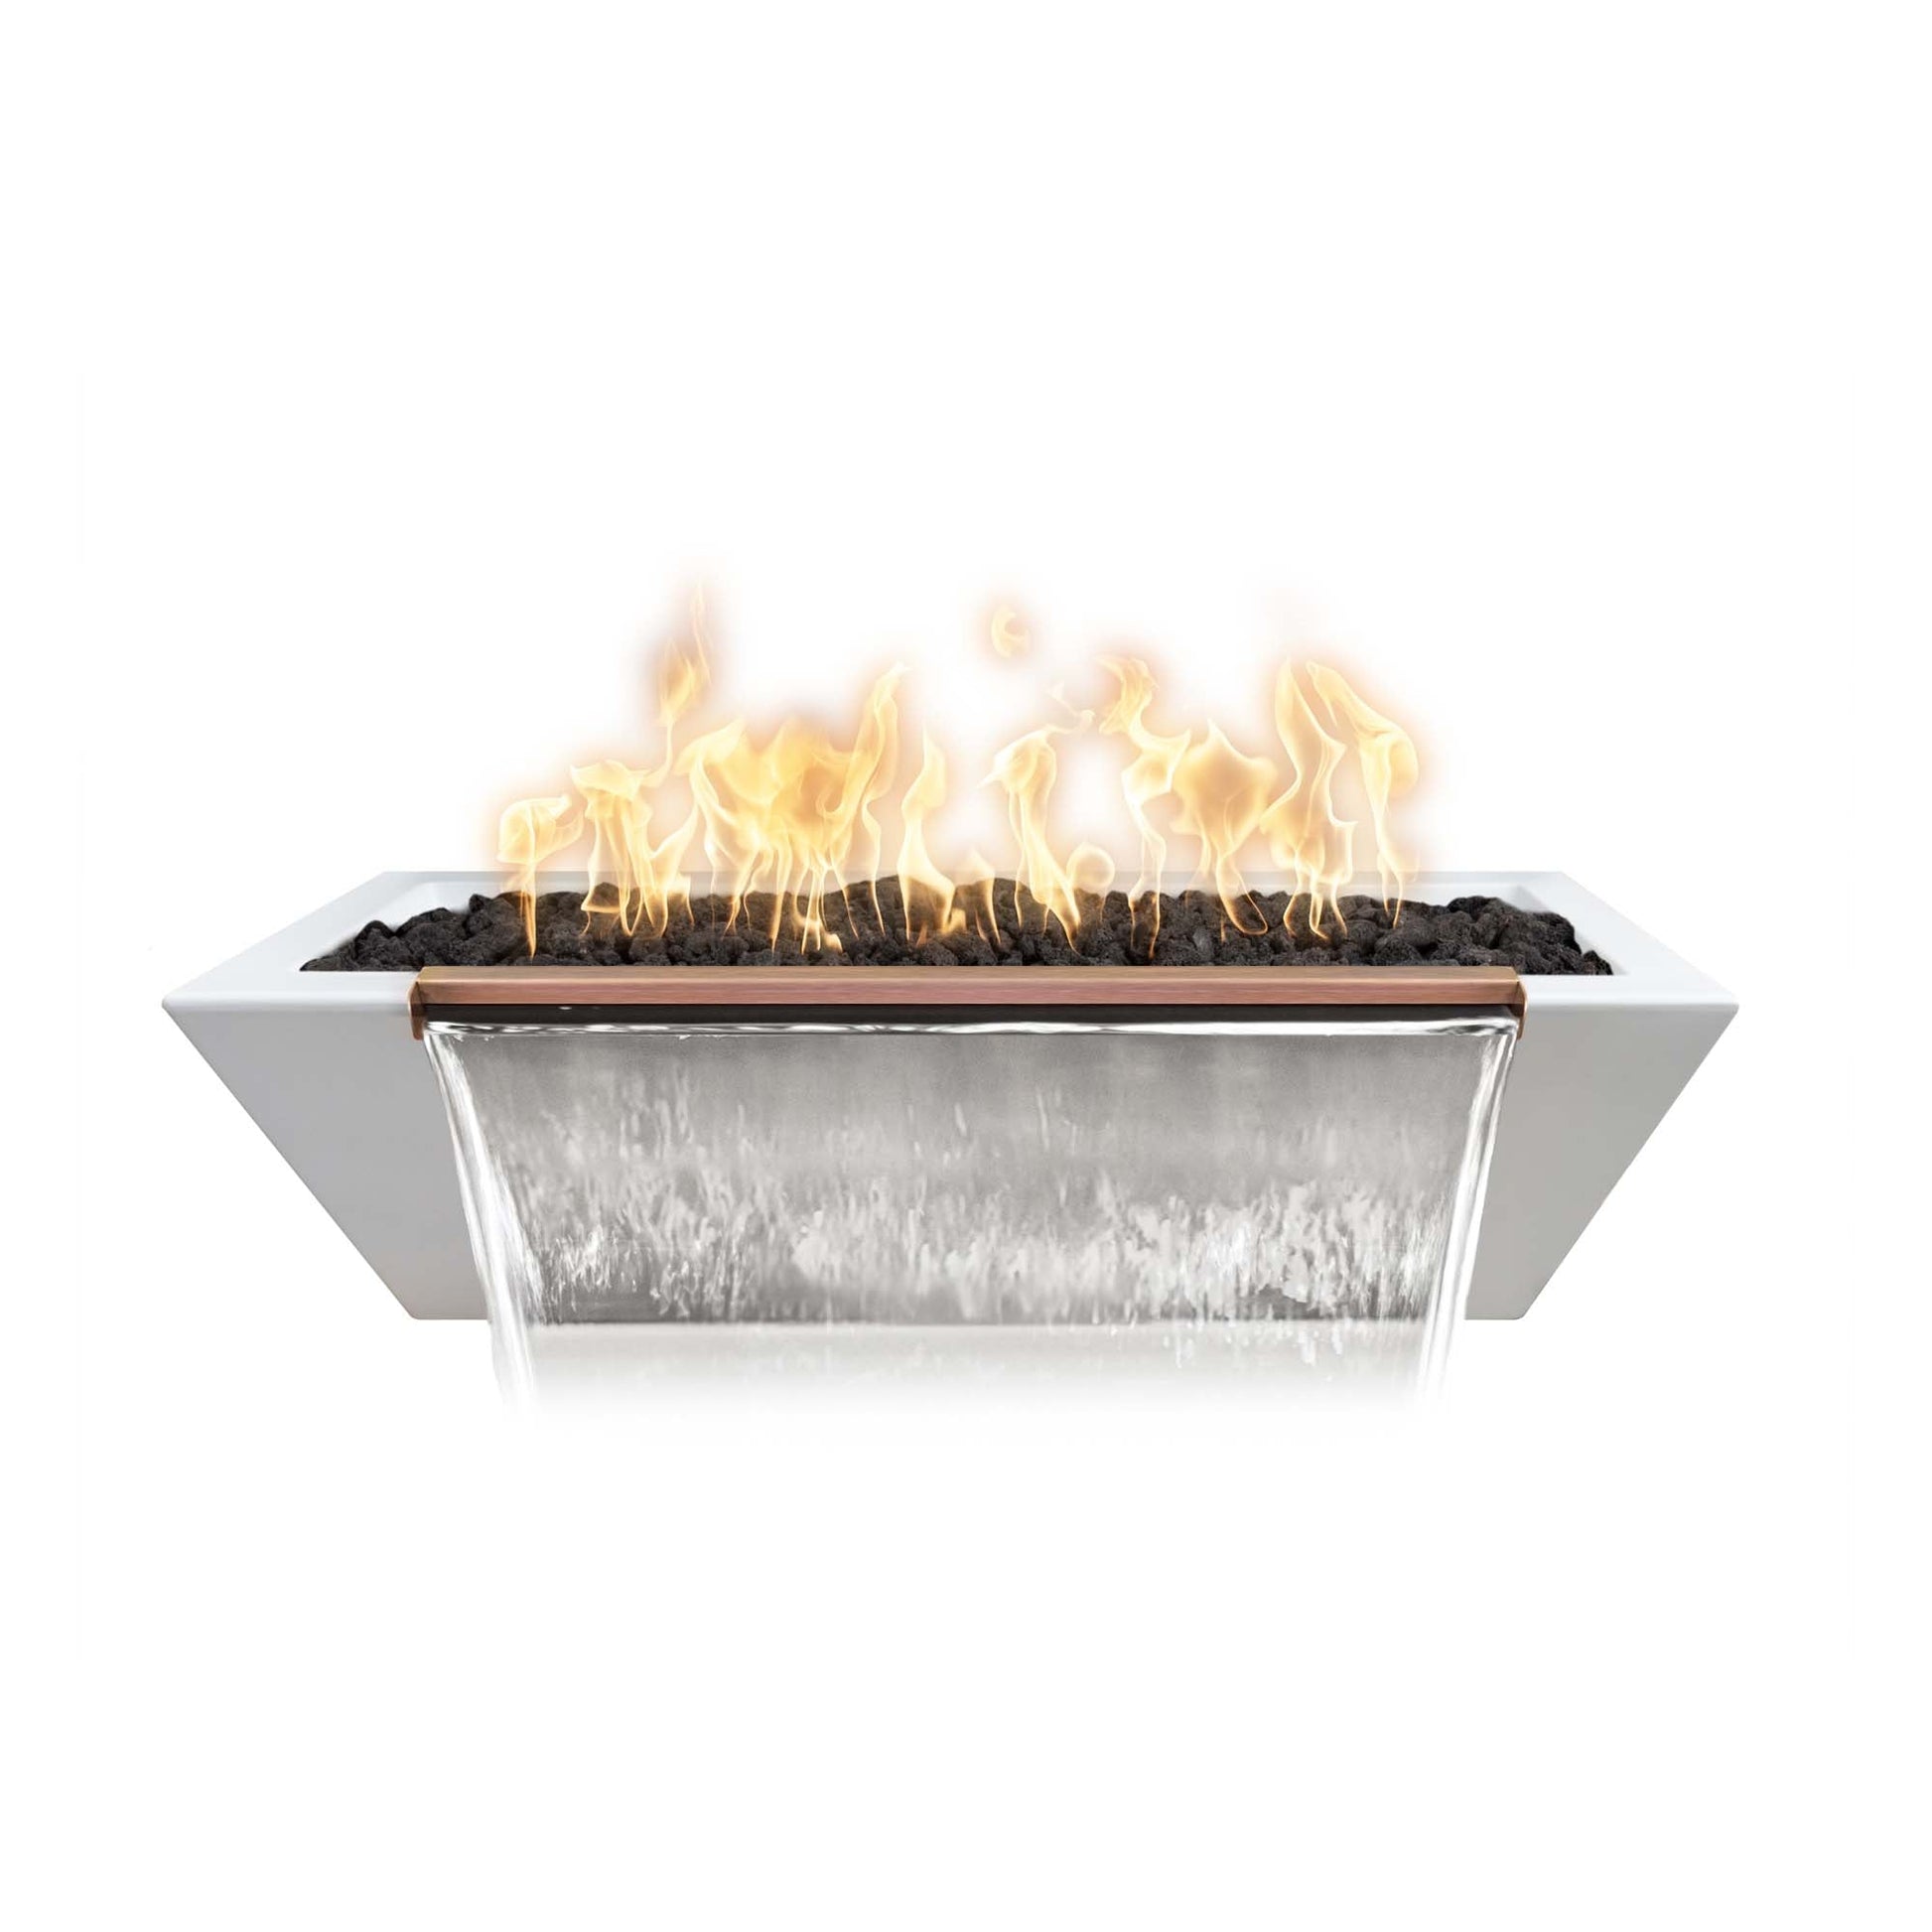 The Outdoor Plus Linear Maya 72" Black GFRC Concrete Natural Gas Fire & Water Bowl with Match Lit with Flame Sense Ignition